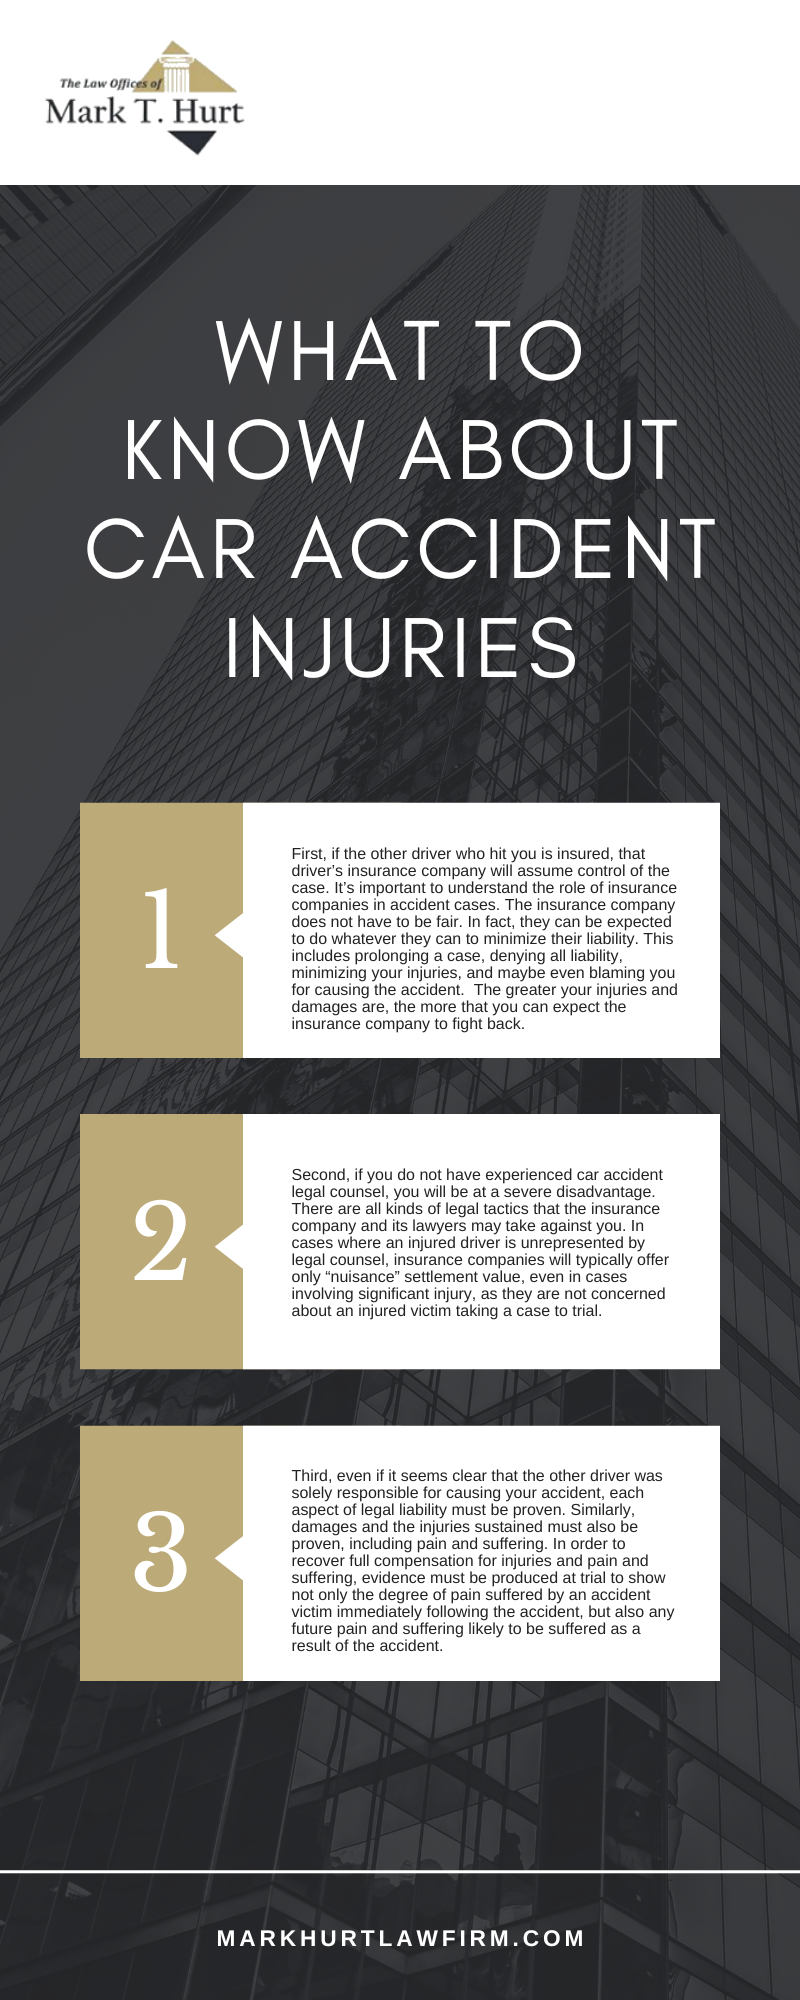 What To Know About Car Accident Injuries Infographic